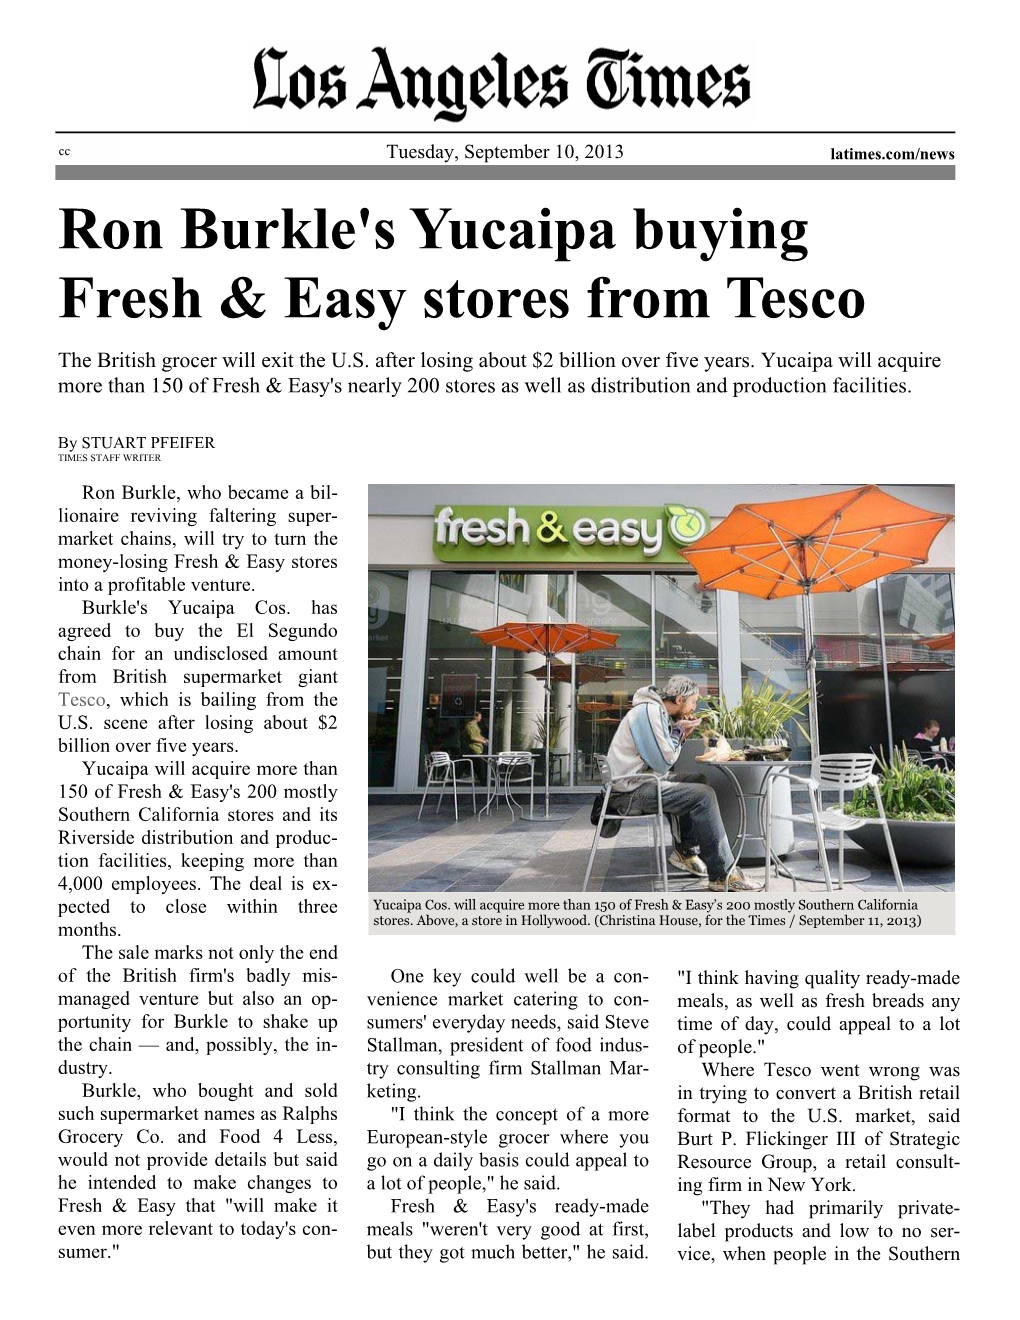 Ron Burkle's Yucaipa Buying Fresh & Easy Stores from Tesco LAT